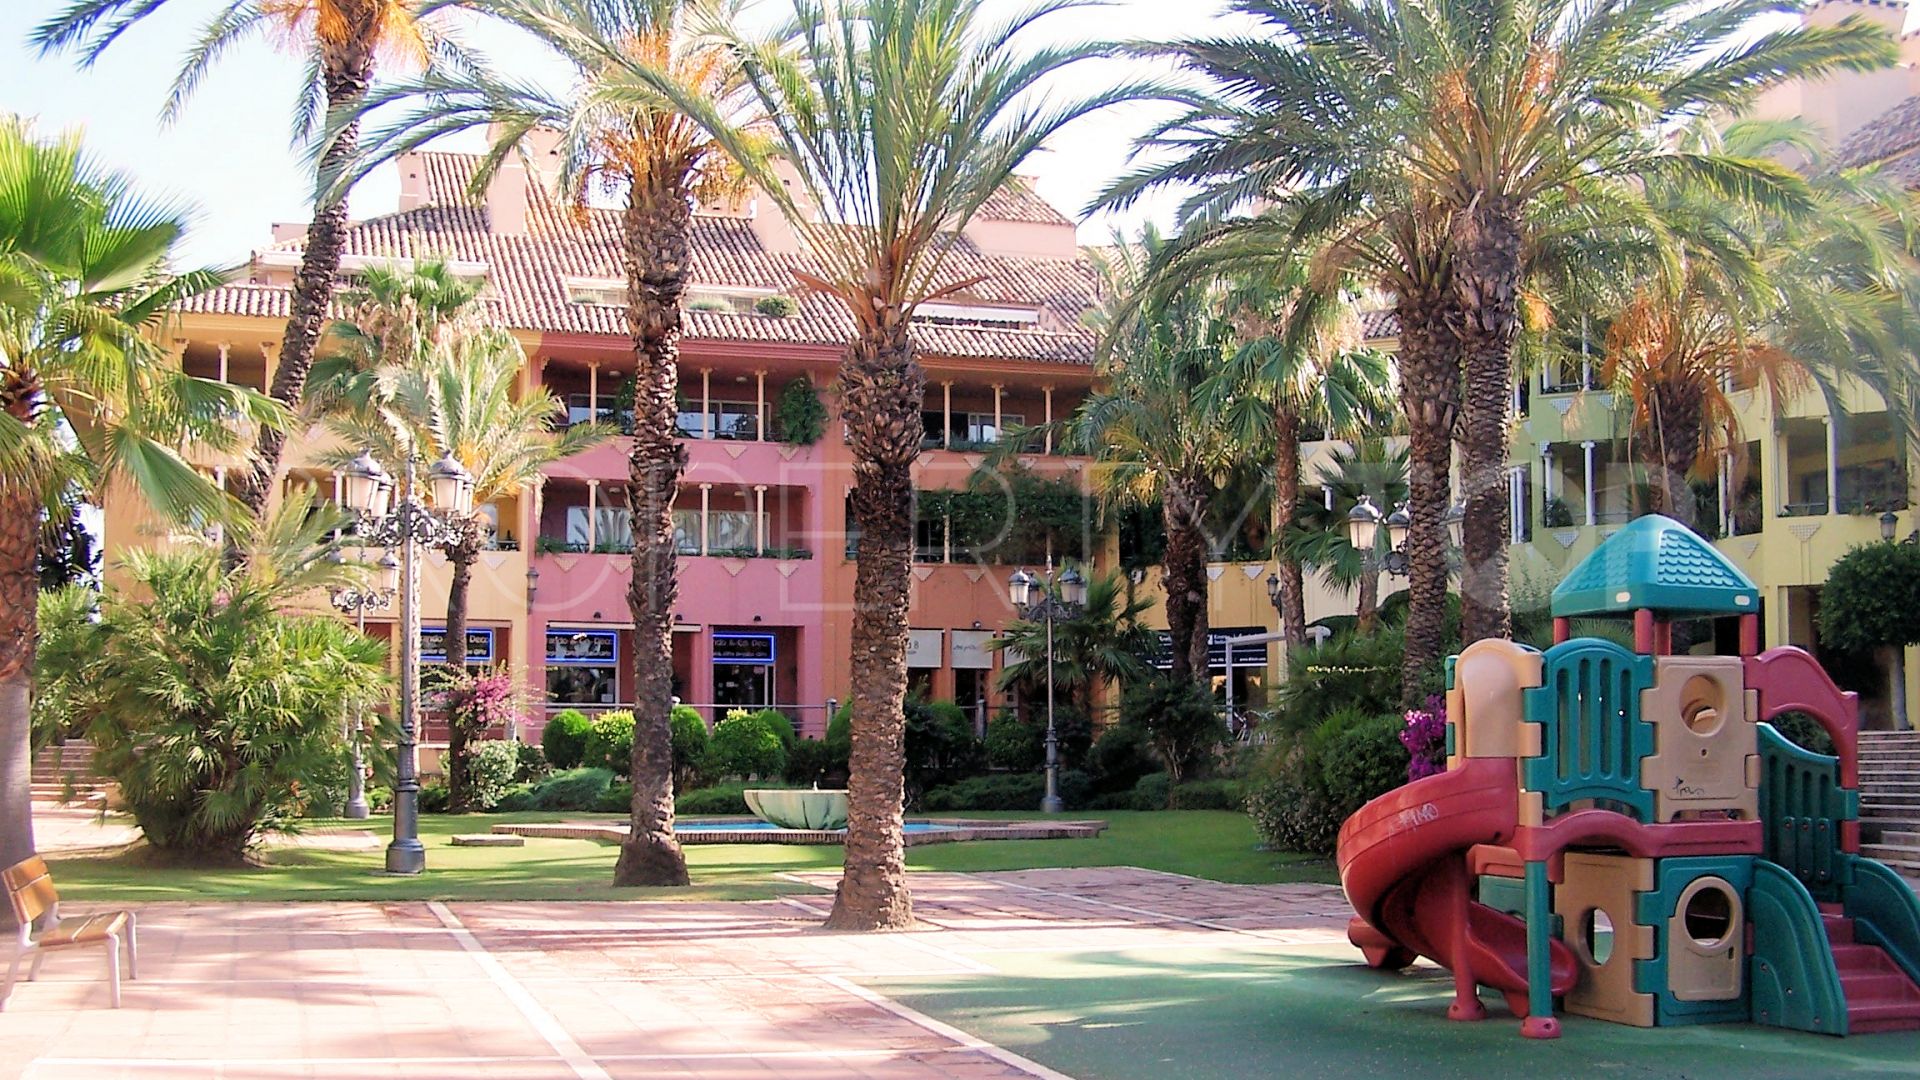 Penthouse for sale in Sotogrande Puerto Deportivo with 2 bedrooms